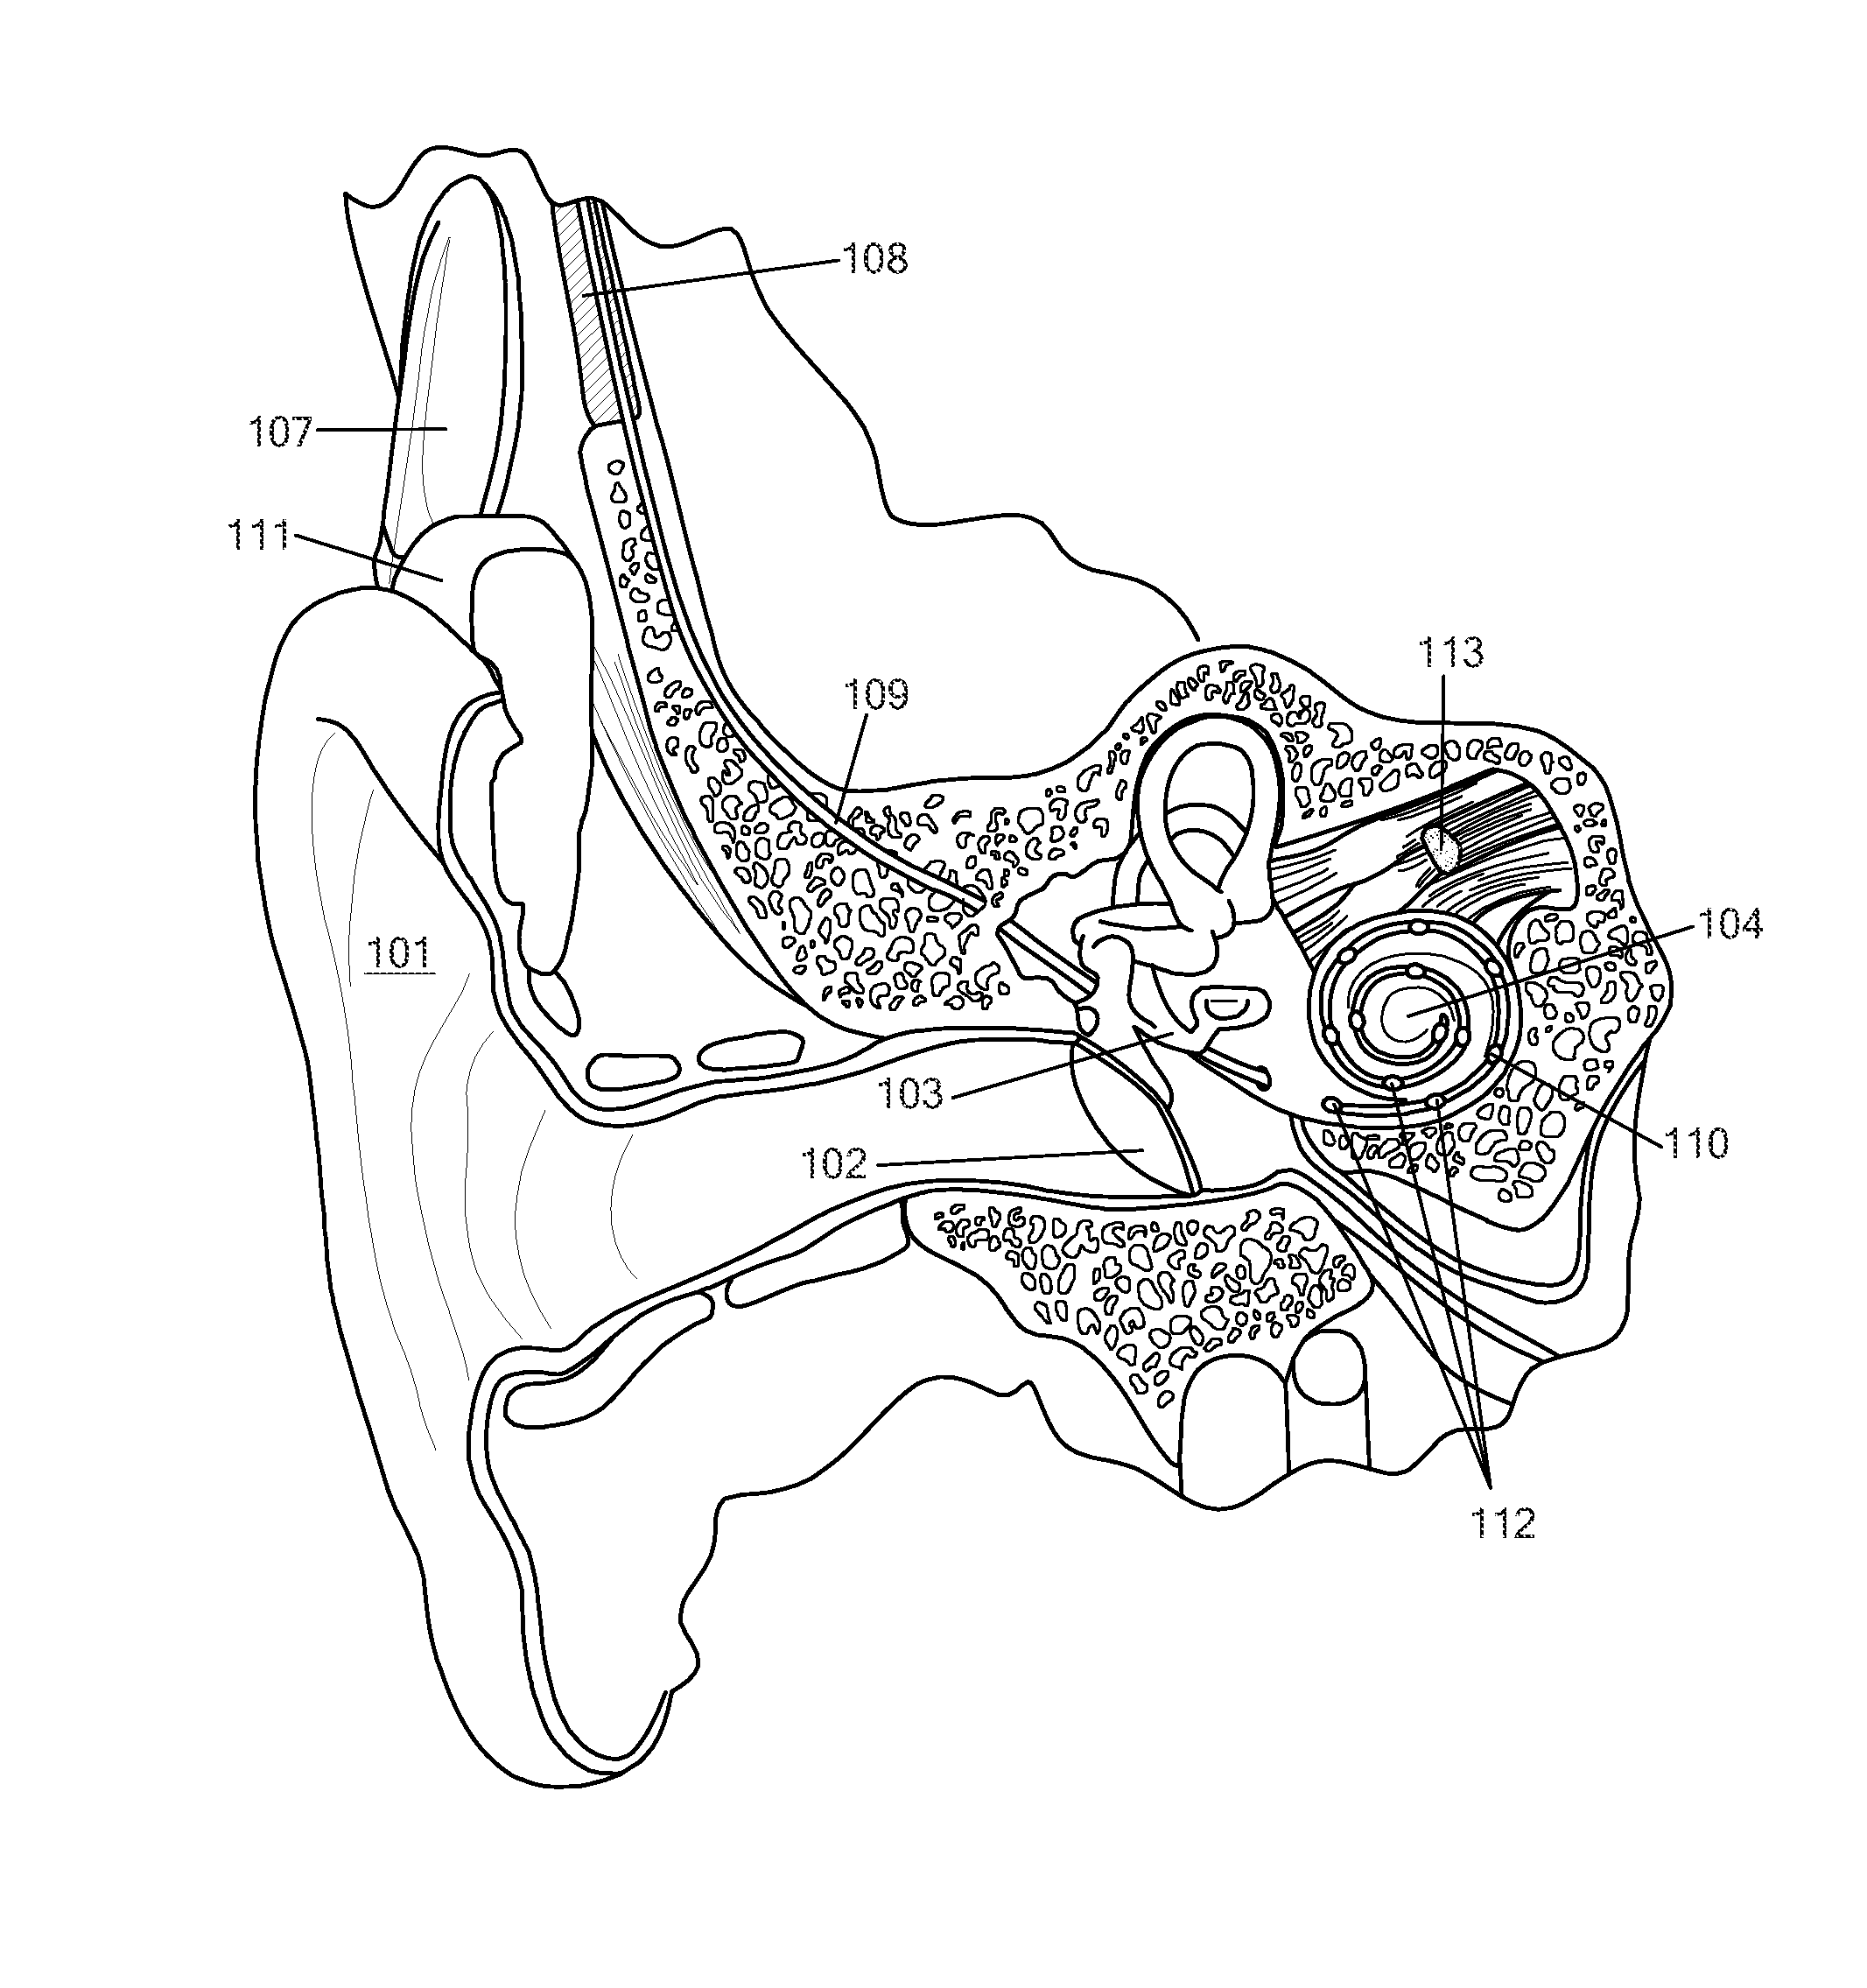 Ear Implant Electrode and Method of Manufacture